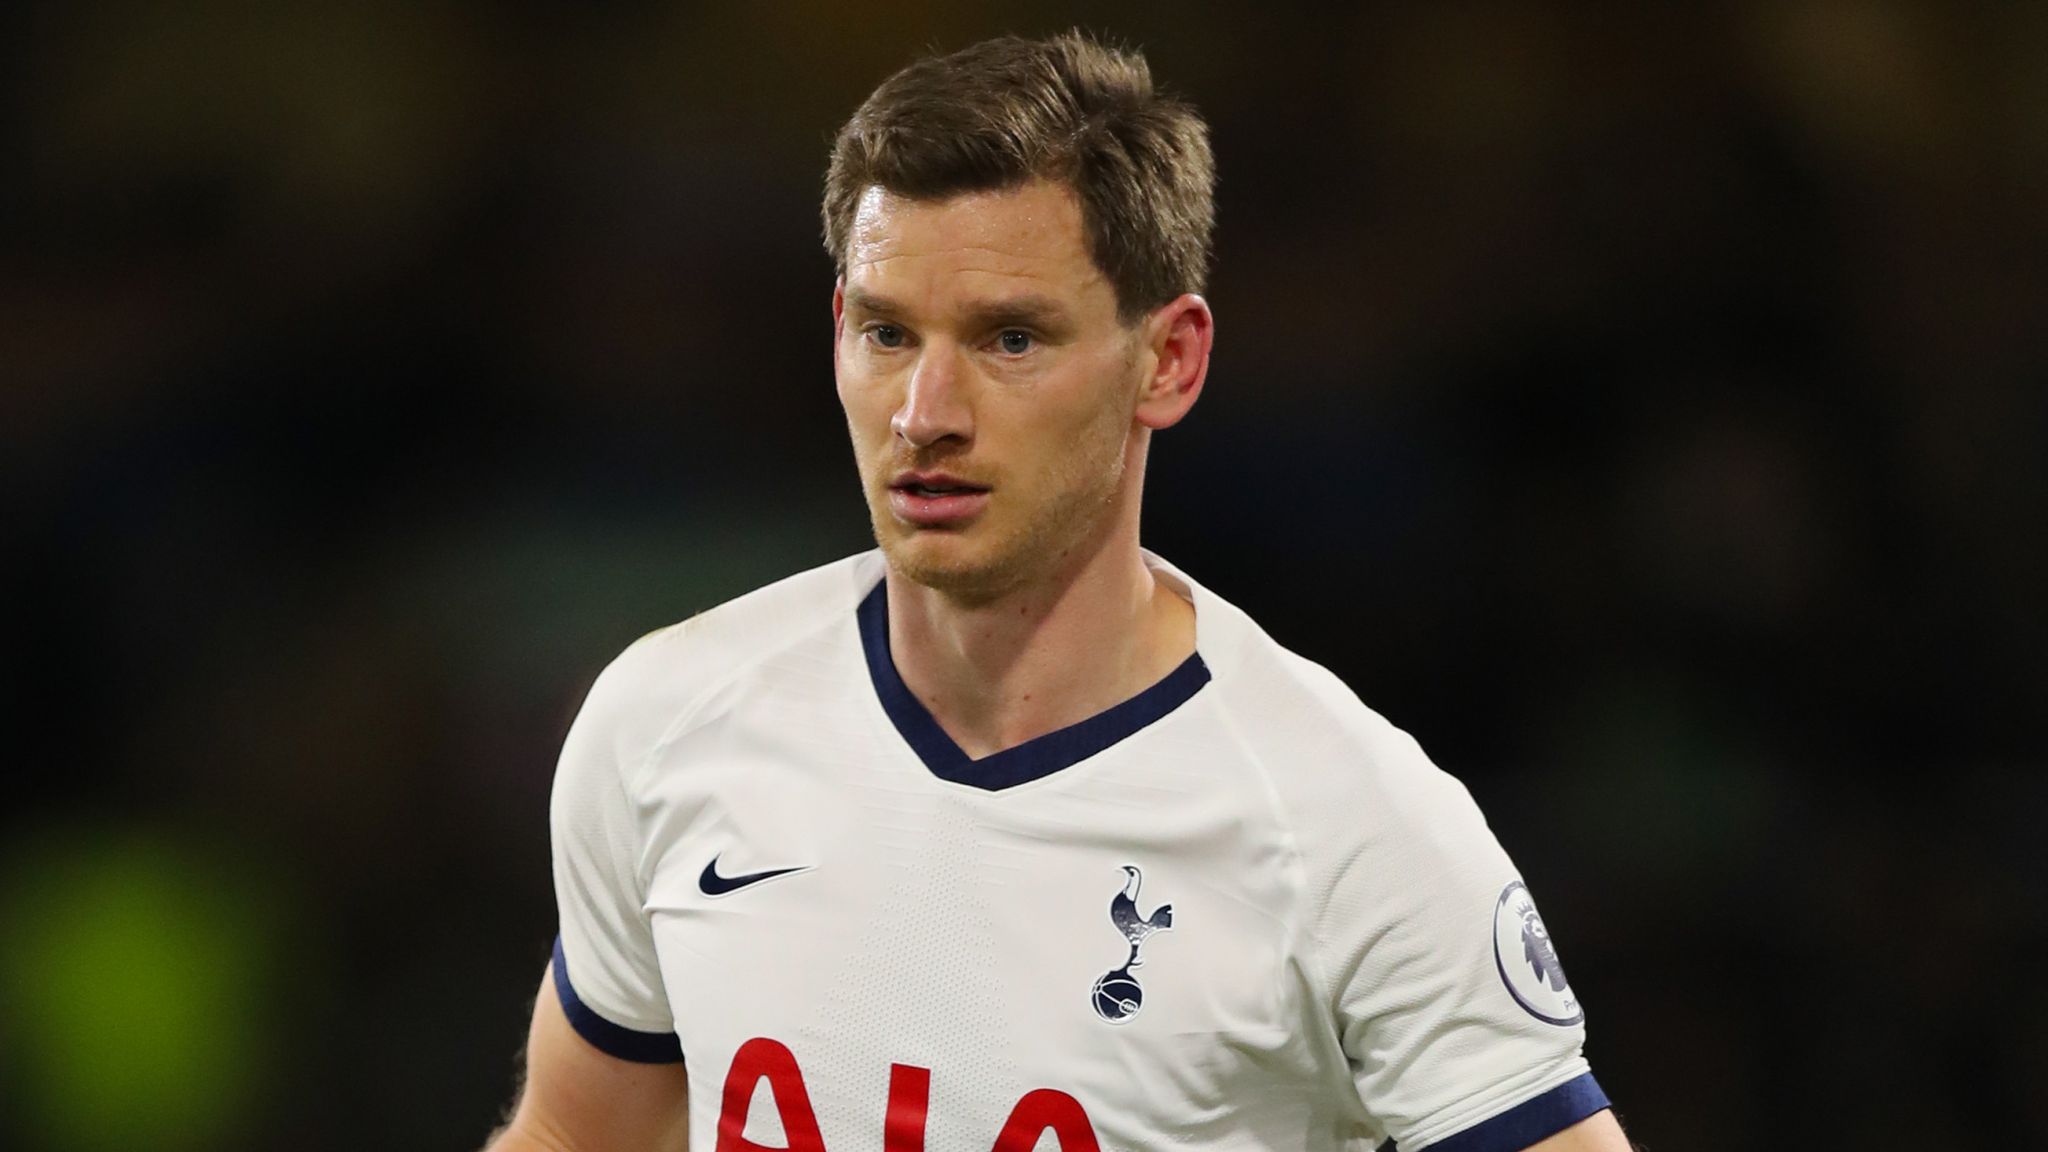 Jan Vertonghen: Former Tottenham defender played with concussion symptoms for nine months | Football News | Sky Sports